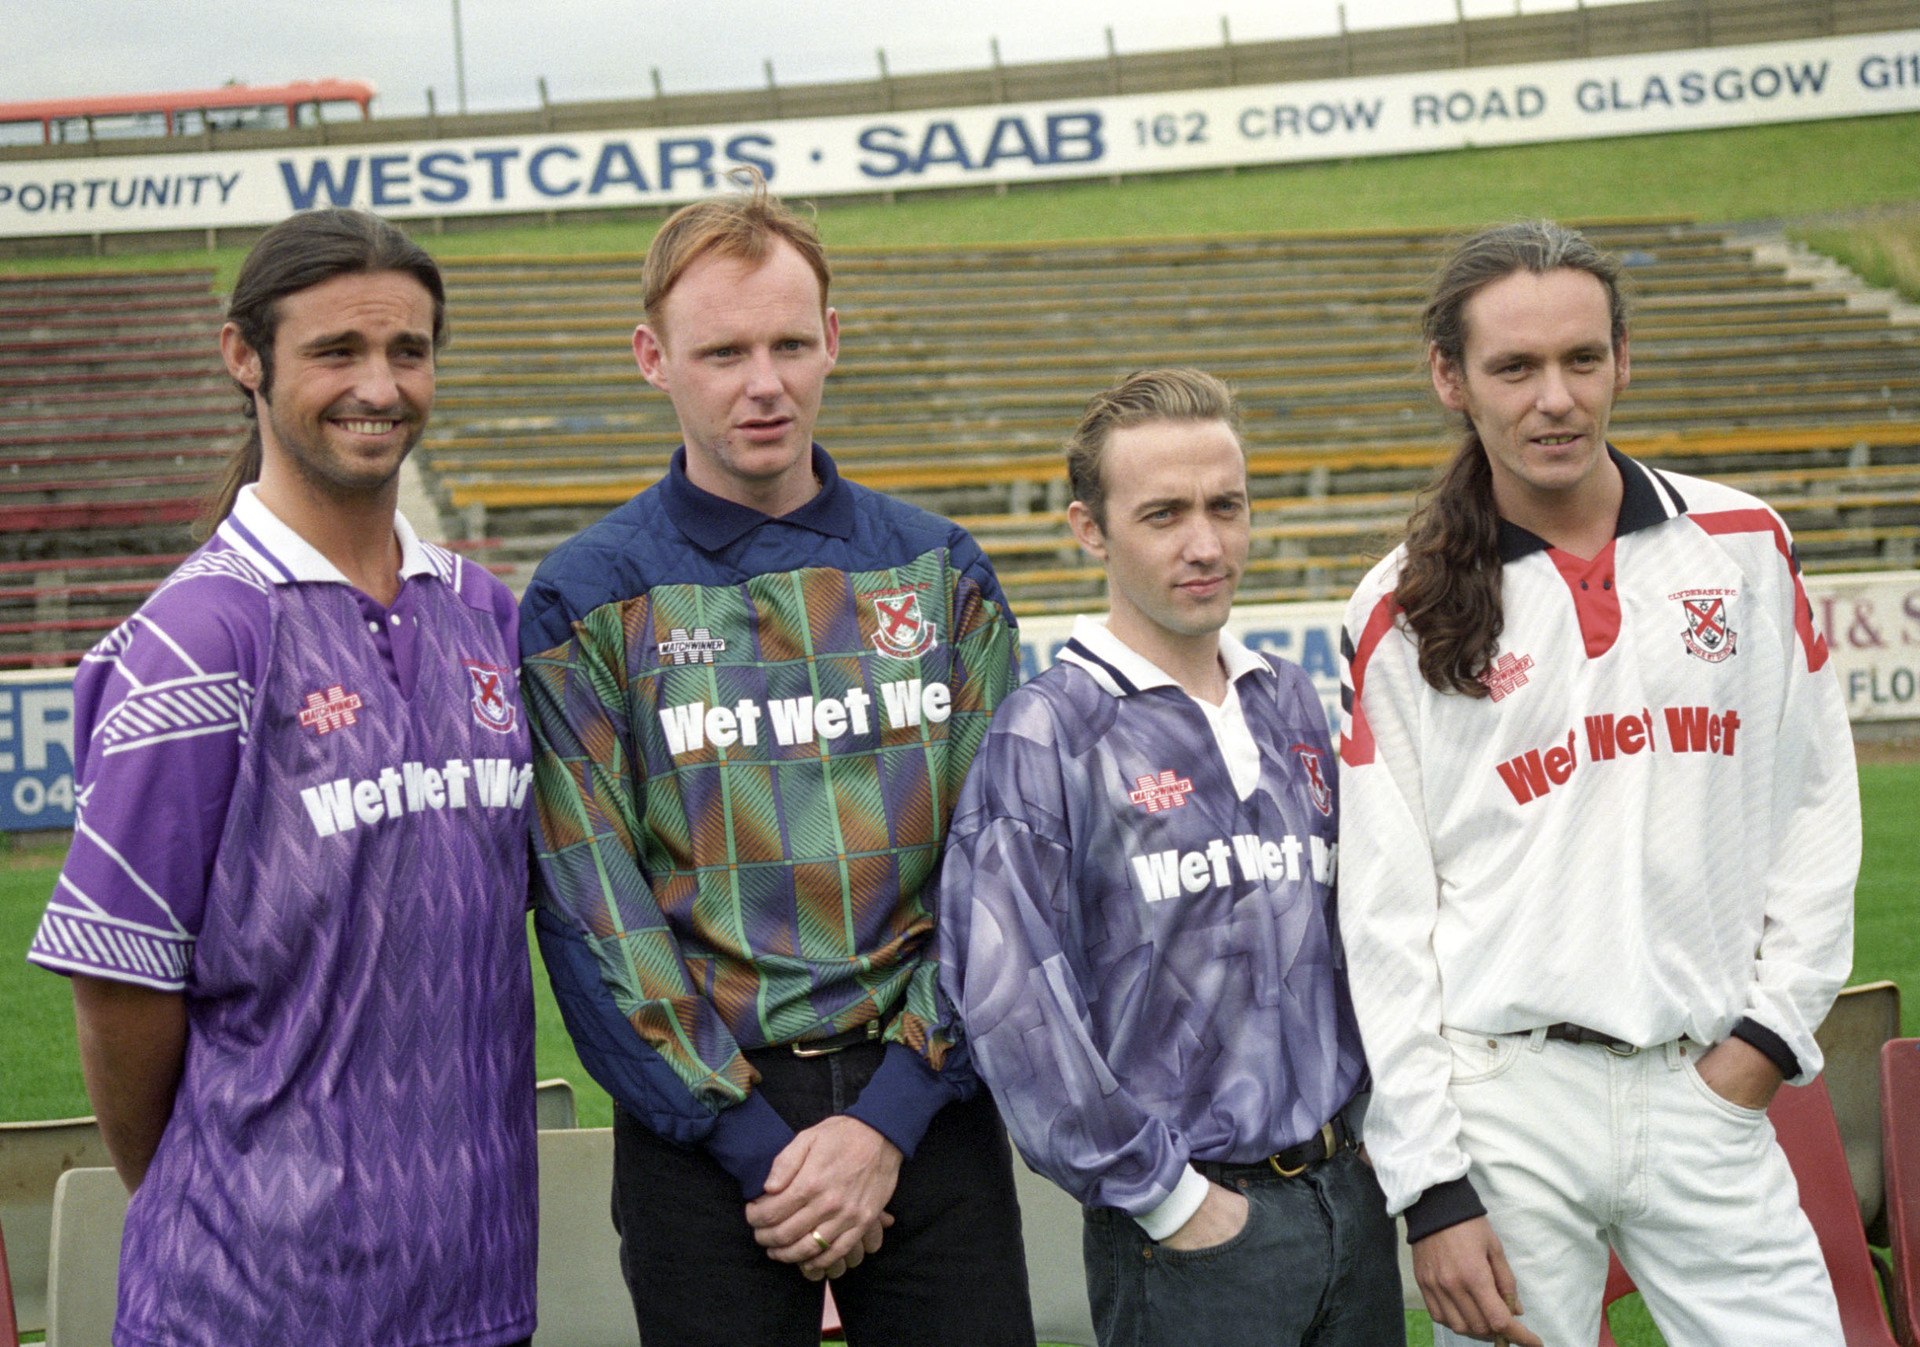 Clydebank FC were sponsored by Marti Pellow and Wet Wet Wet.